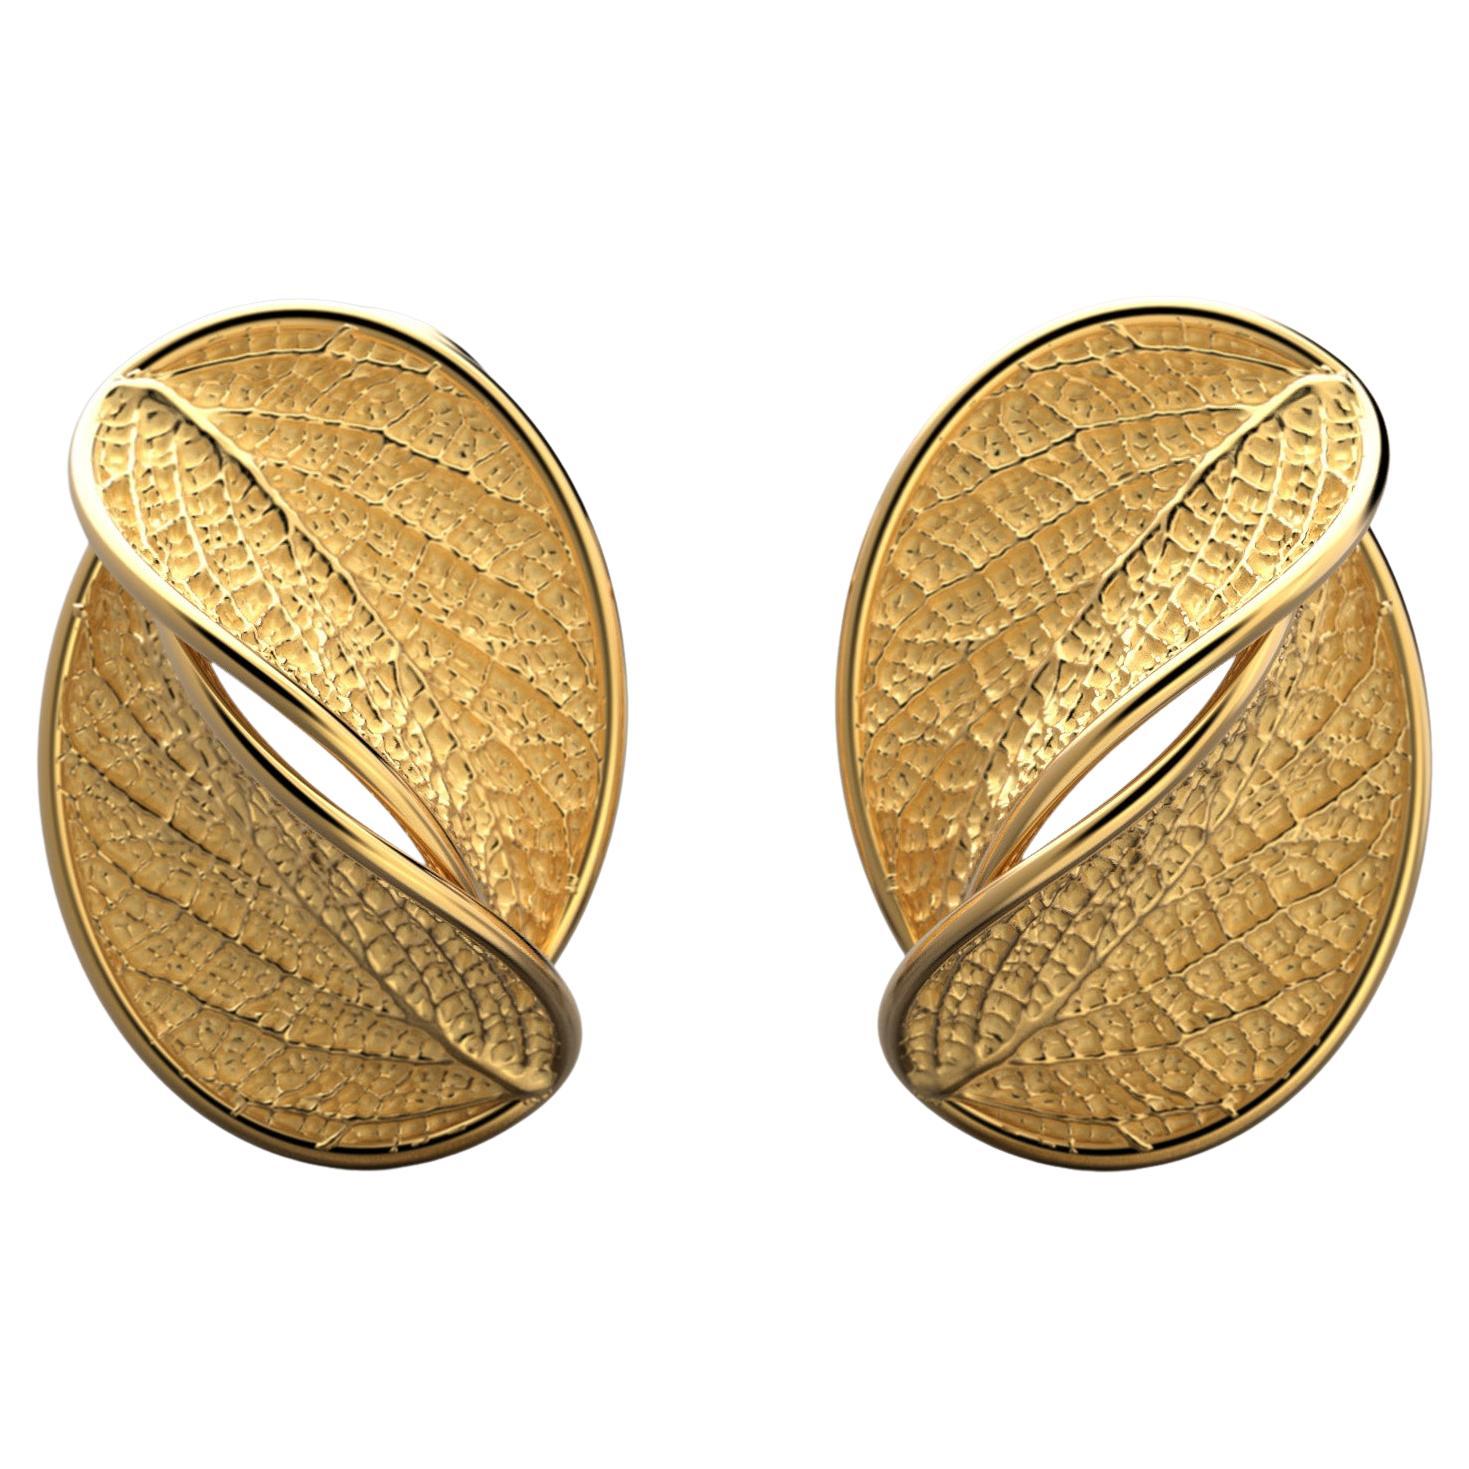 Made to order 18k Gold stud earrings with leaf design. Flora collection.
The earrings of the Flora collection have the shape of the ash leaf, a sacred tree in many cultures, a symbol of the sun and always used as a protection.
The earrings feature